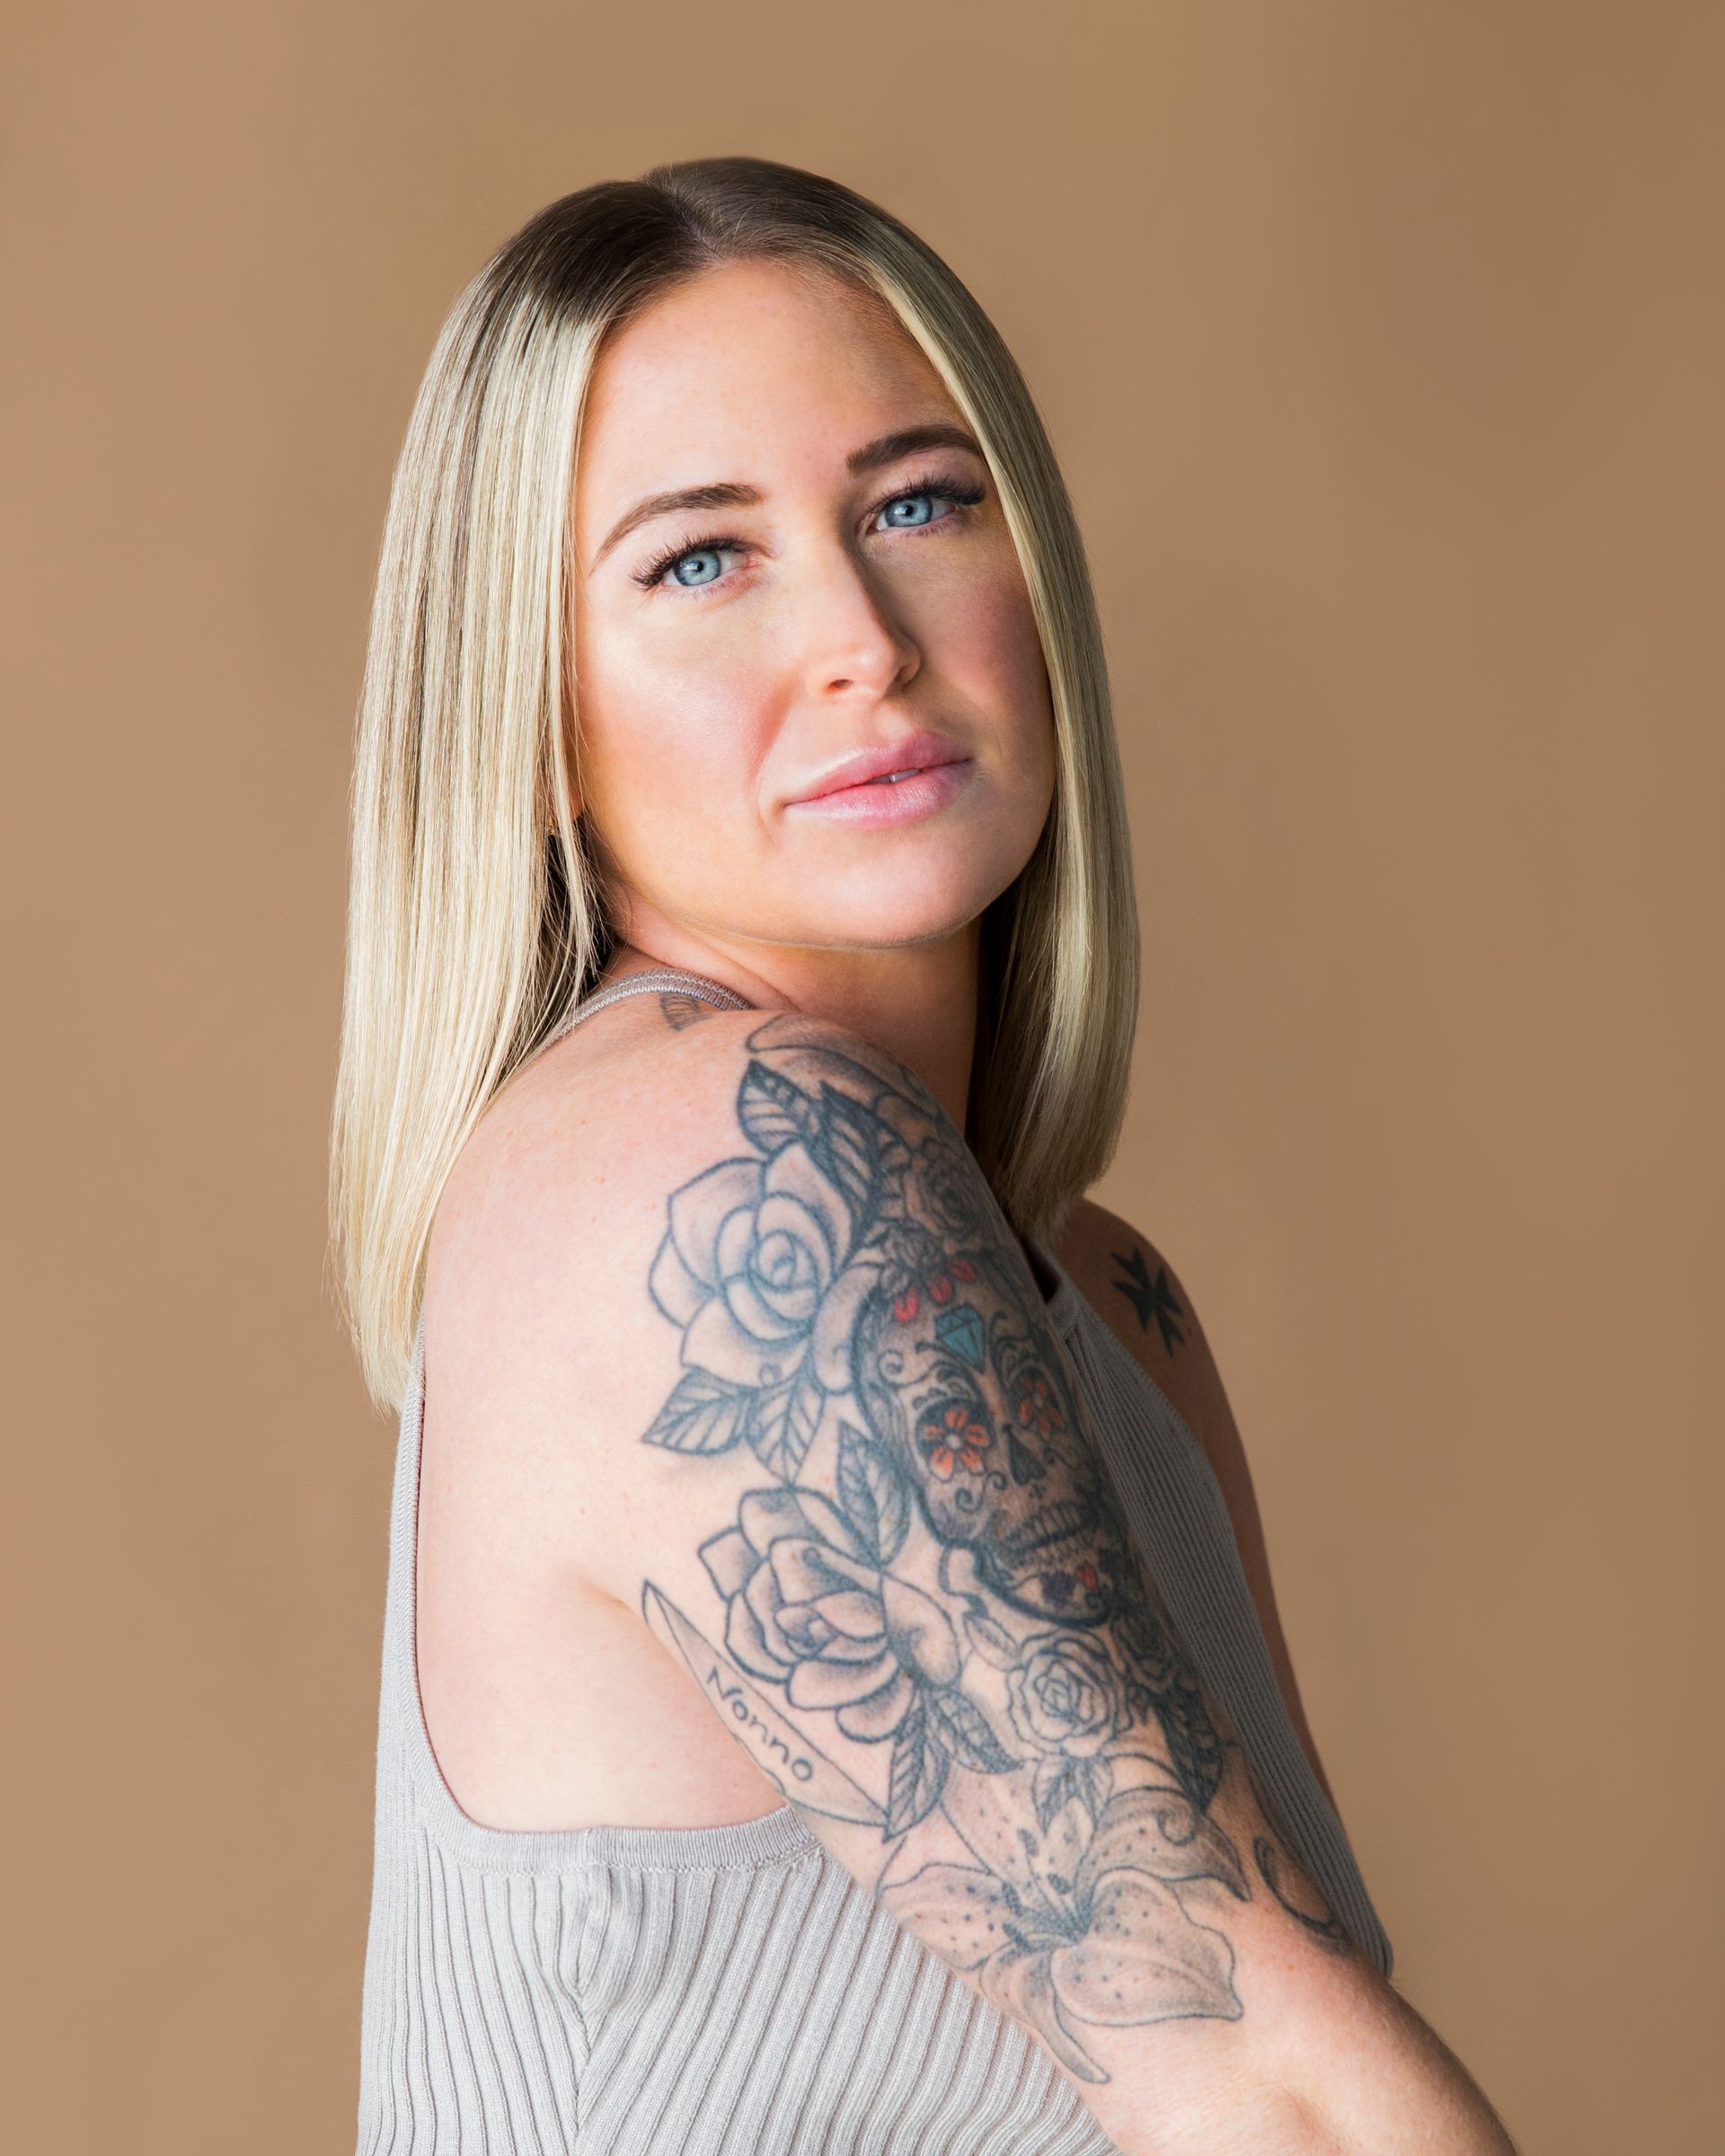 white woman with tattoos on arm